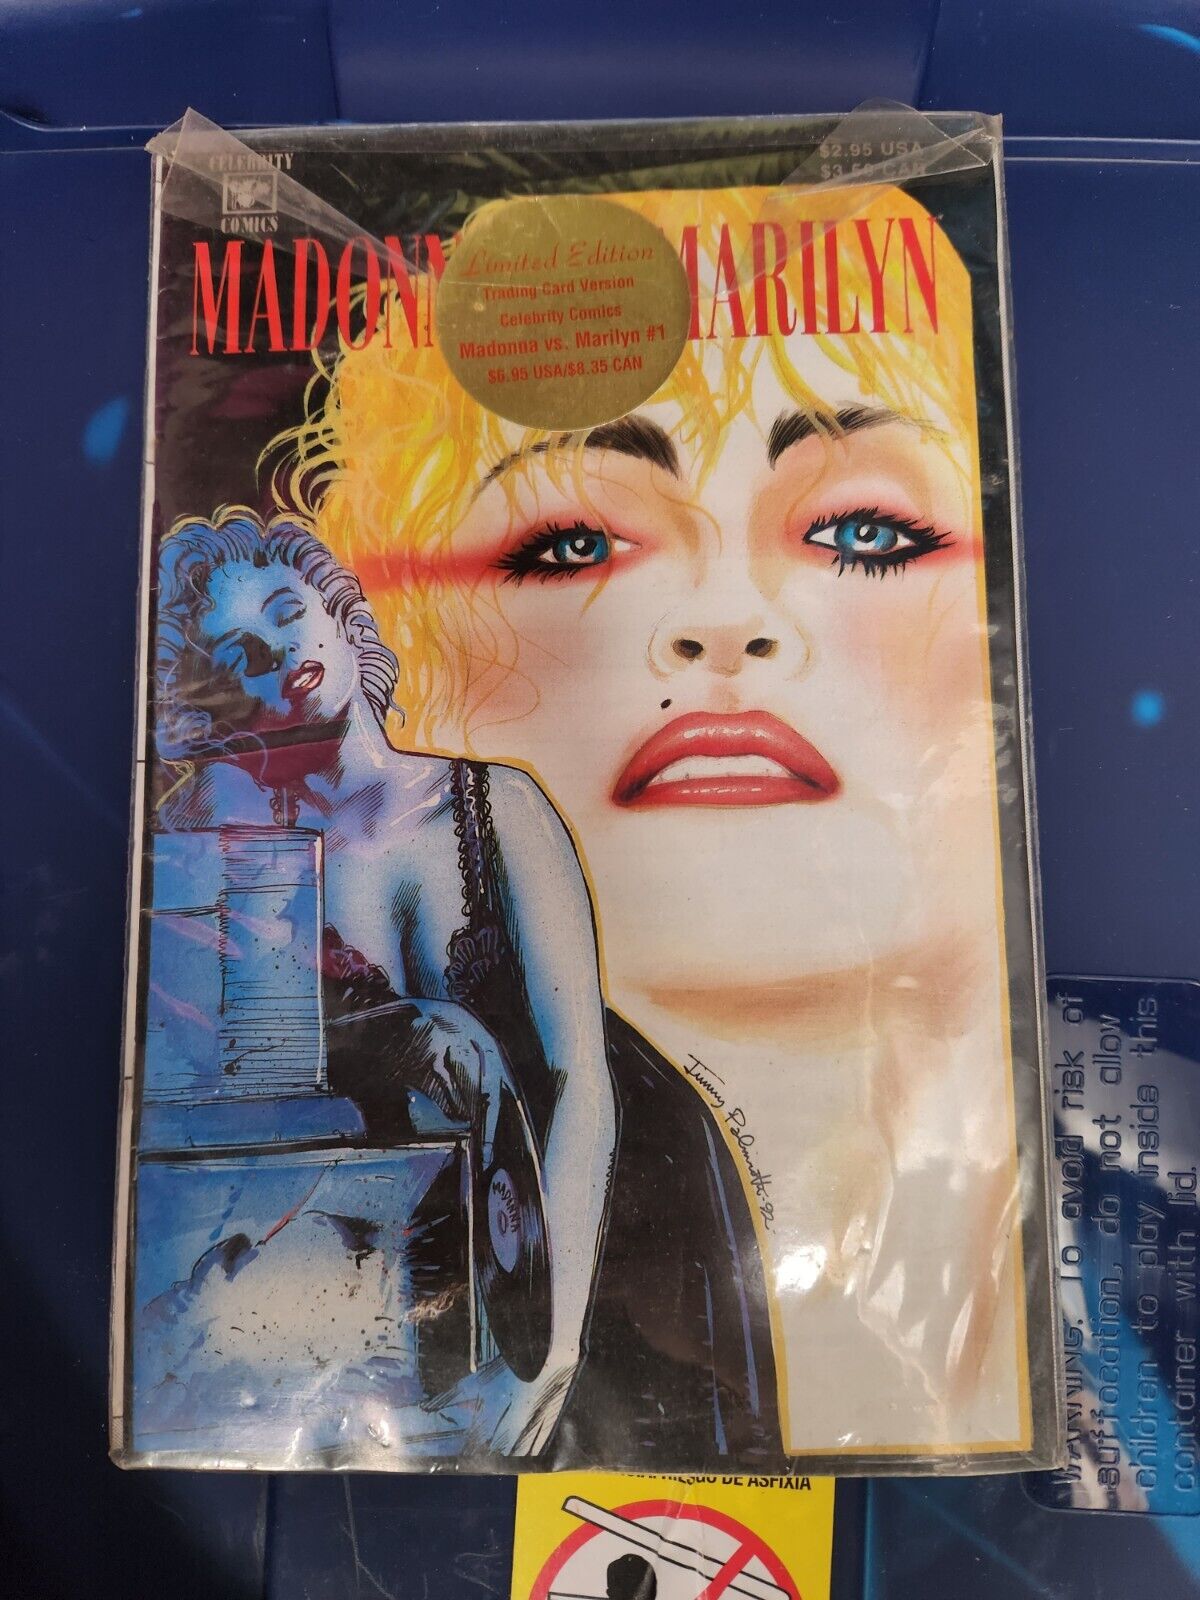 MADONNA VS MARILYN #1  LIMITED EDITION TRADING CARD VERSION #050of 1000  